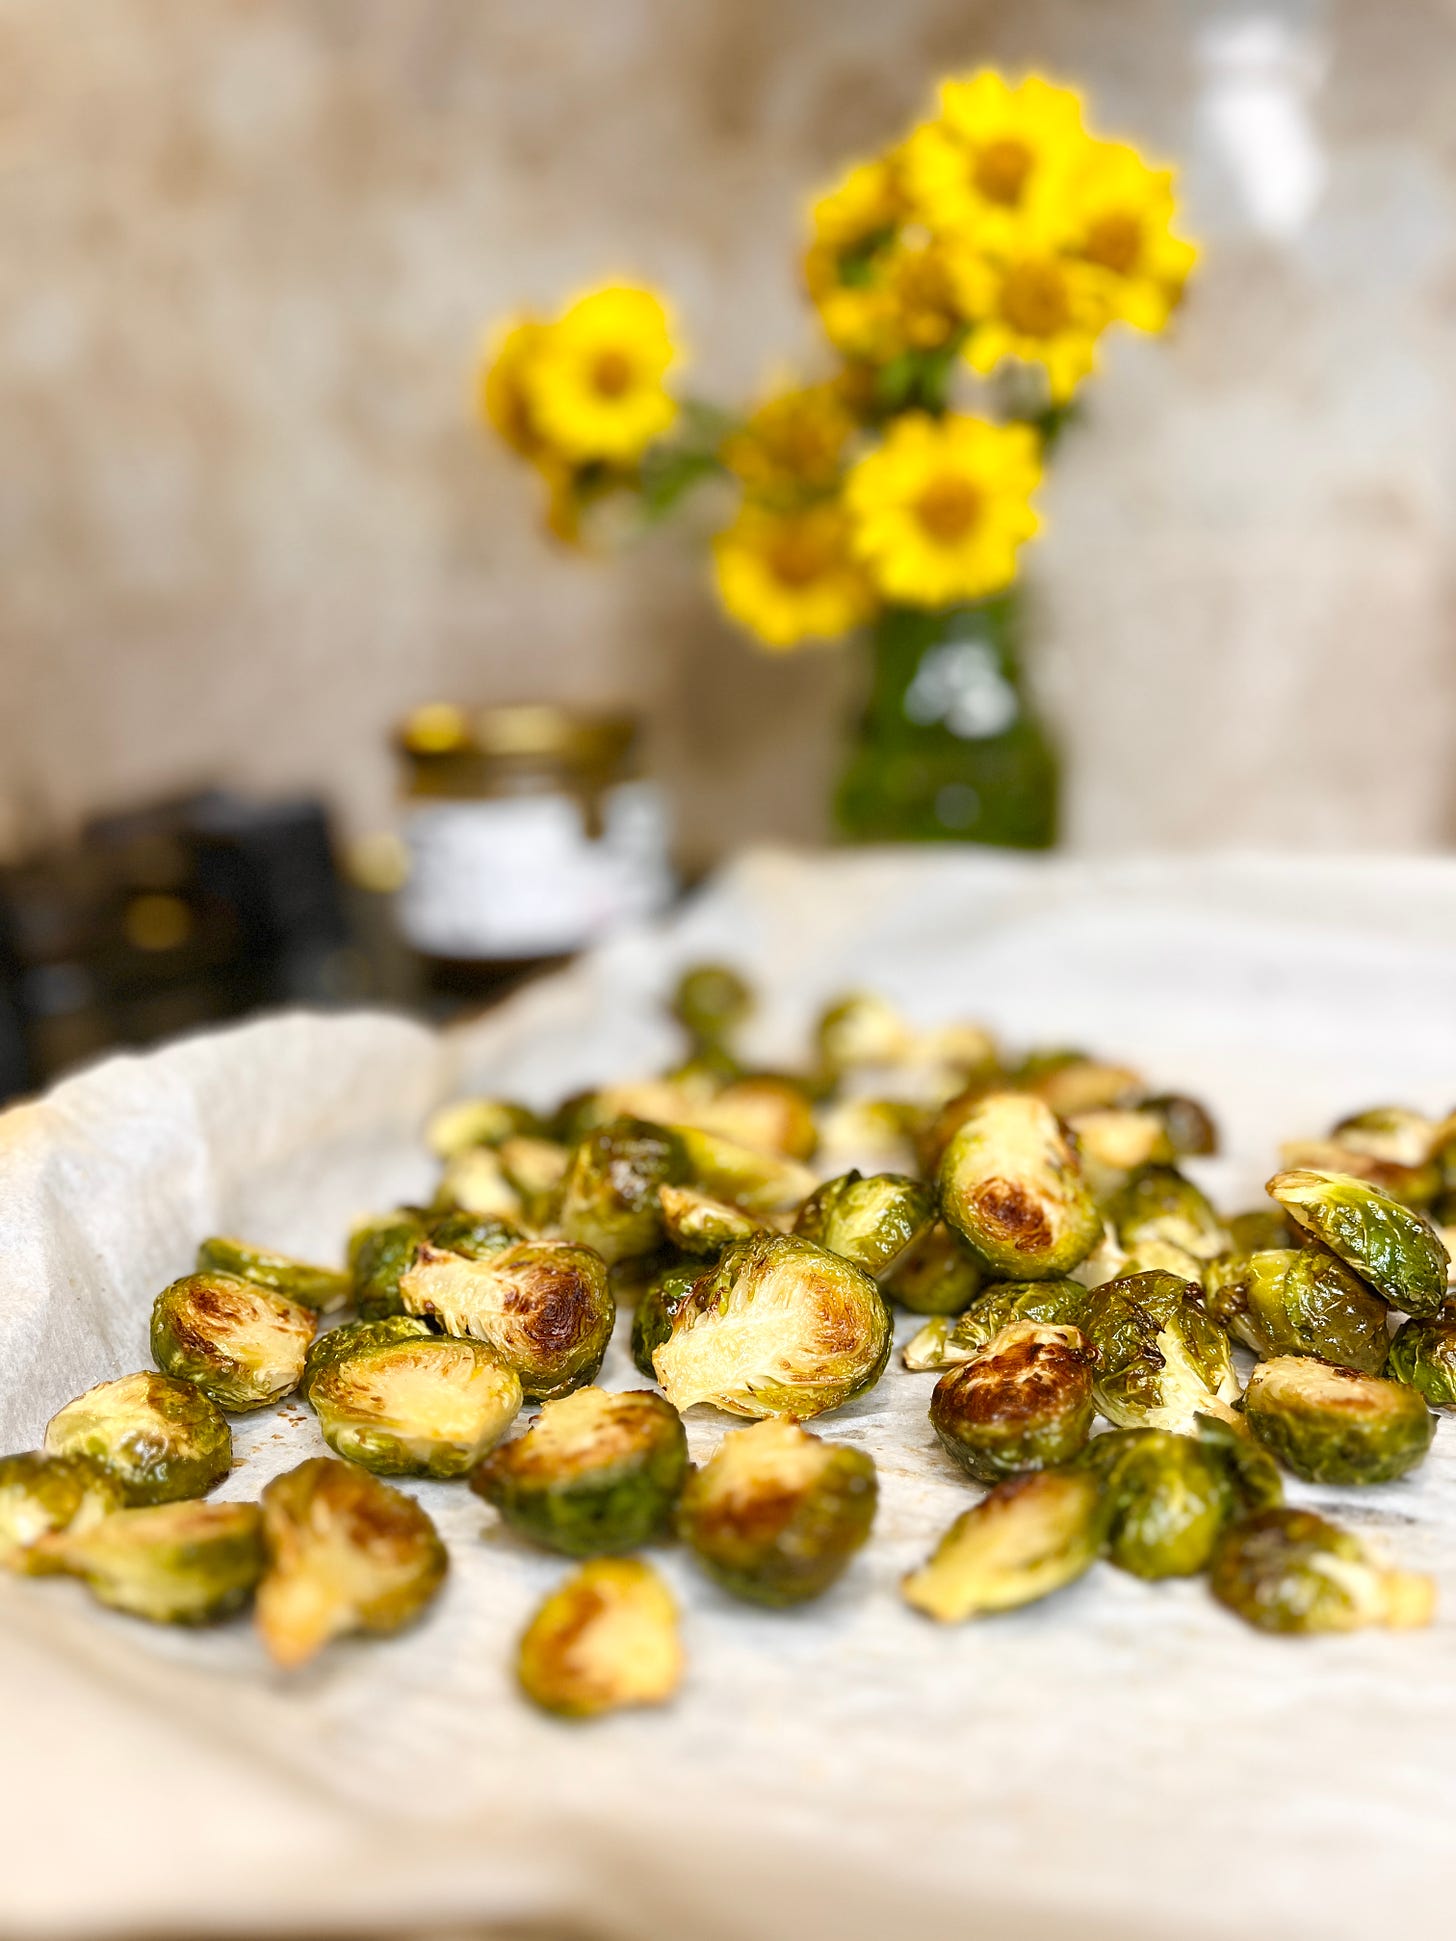 roasted brussels sprouts on a parchment lined baking sheet, with a jar of yellow wildflowers and a jar of honey in the background